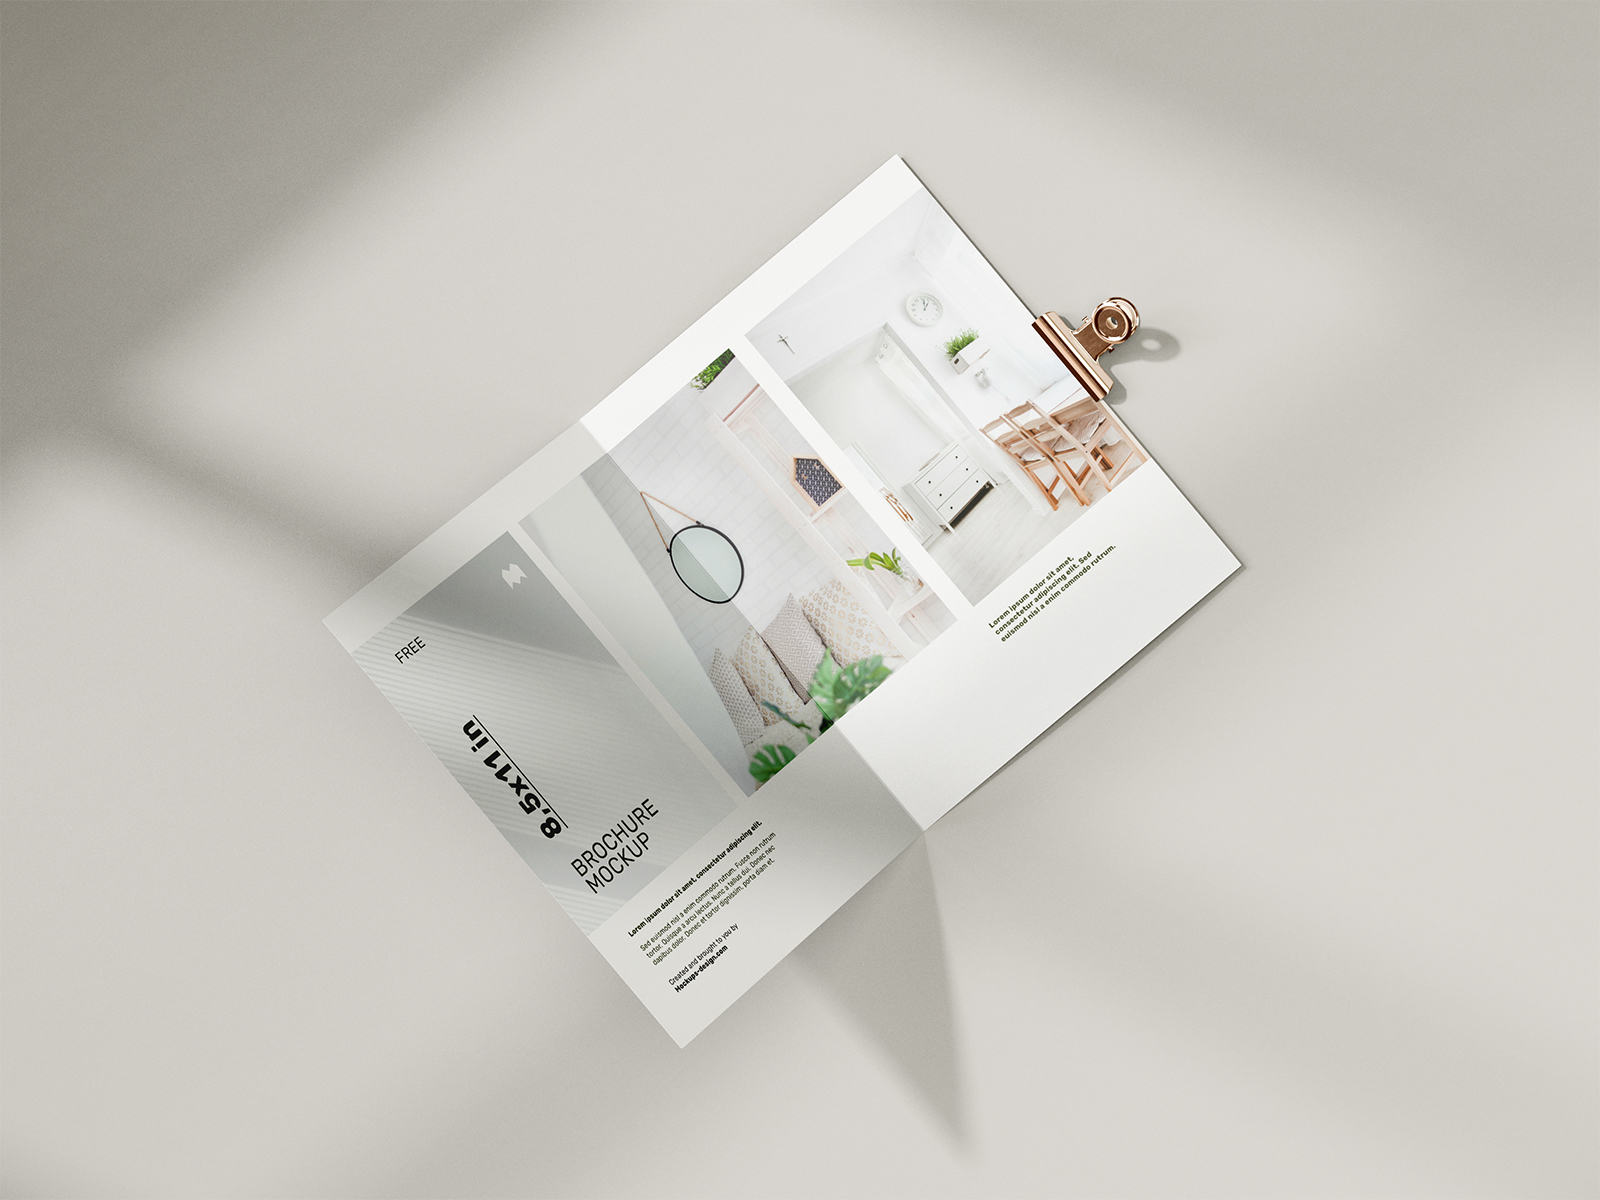 Packaging Mockup Download Free Download Free And Premium Psd Mockup Templates And Design Assets